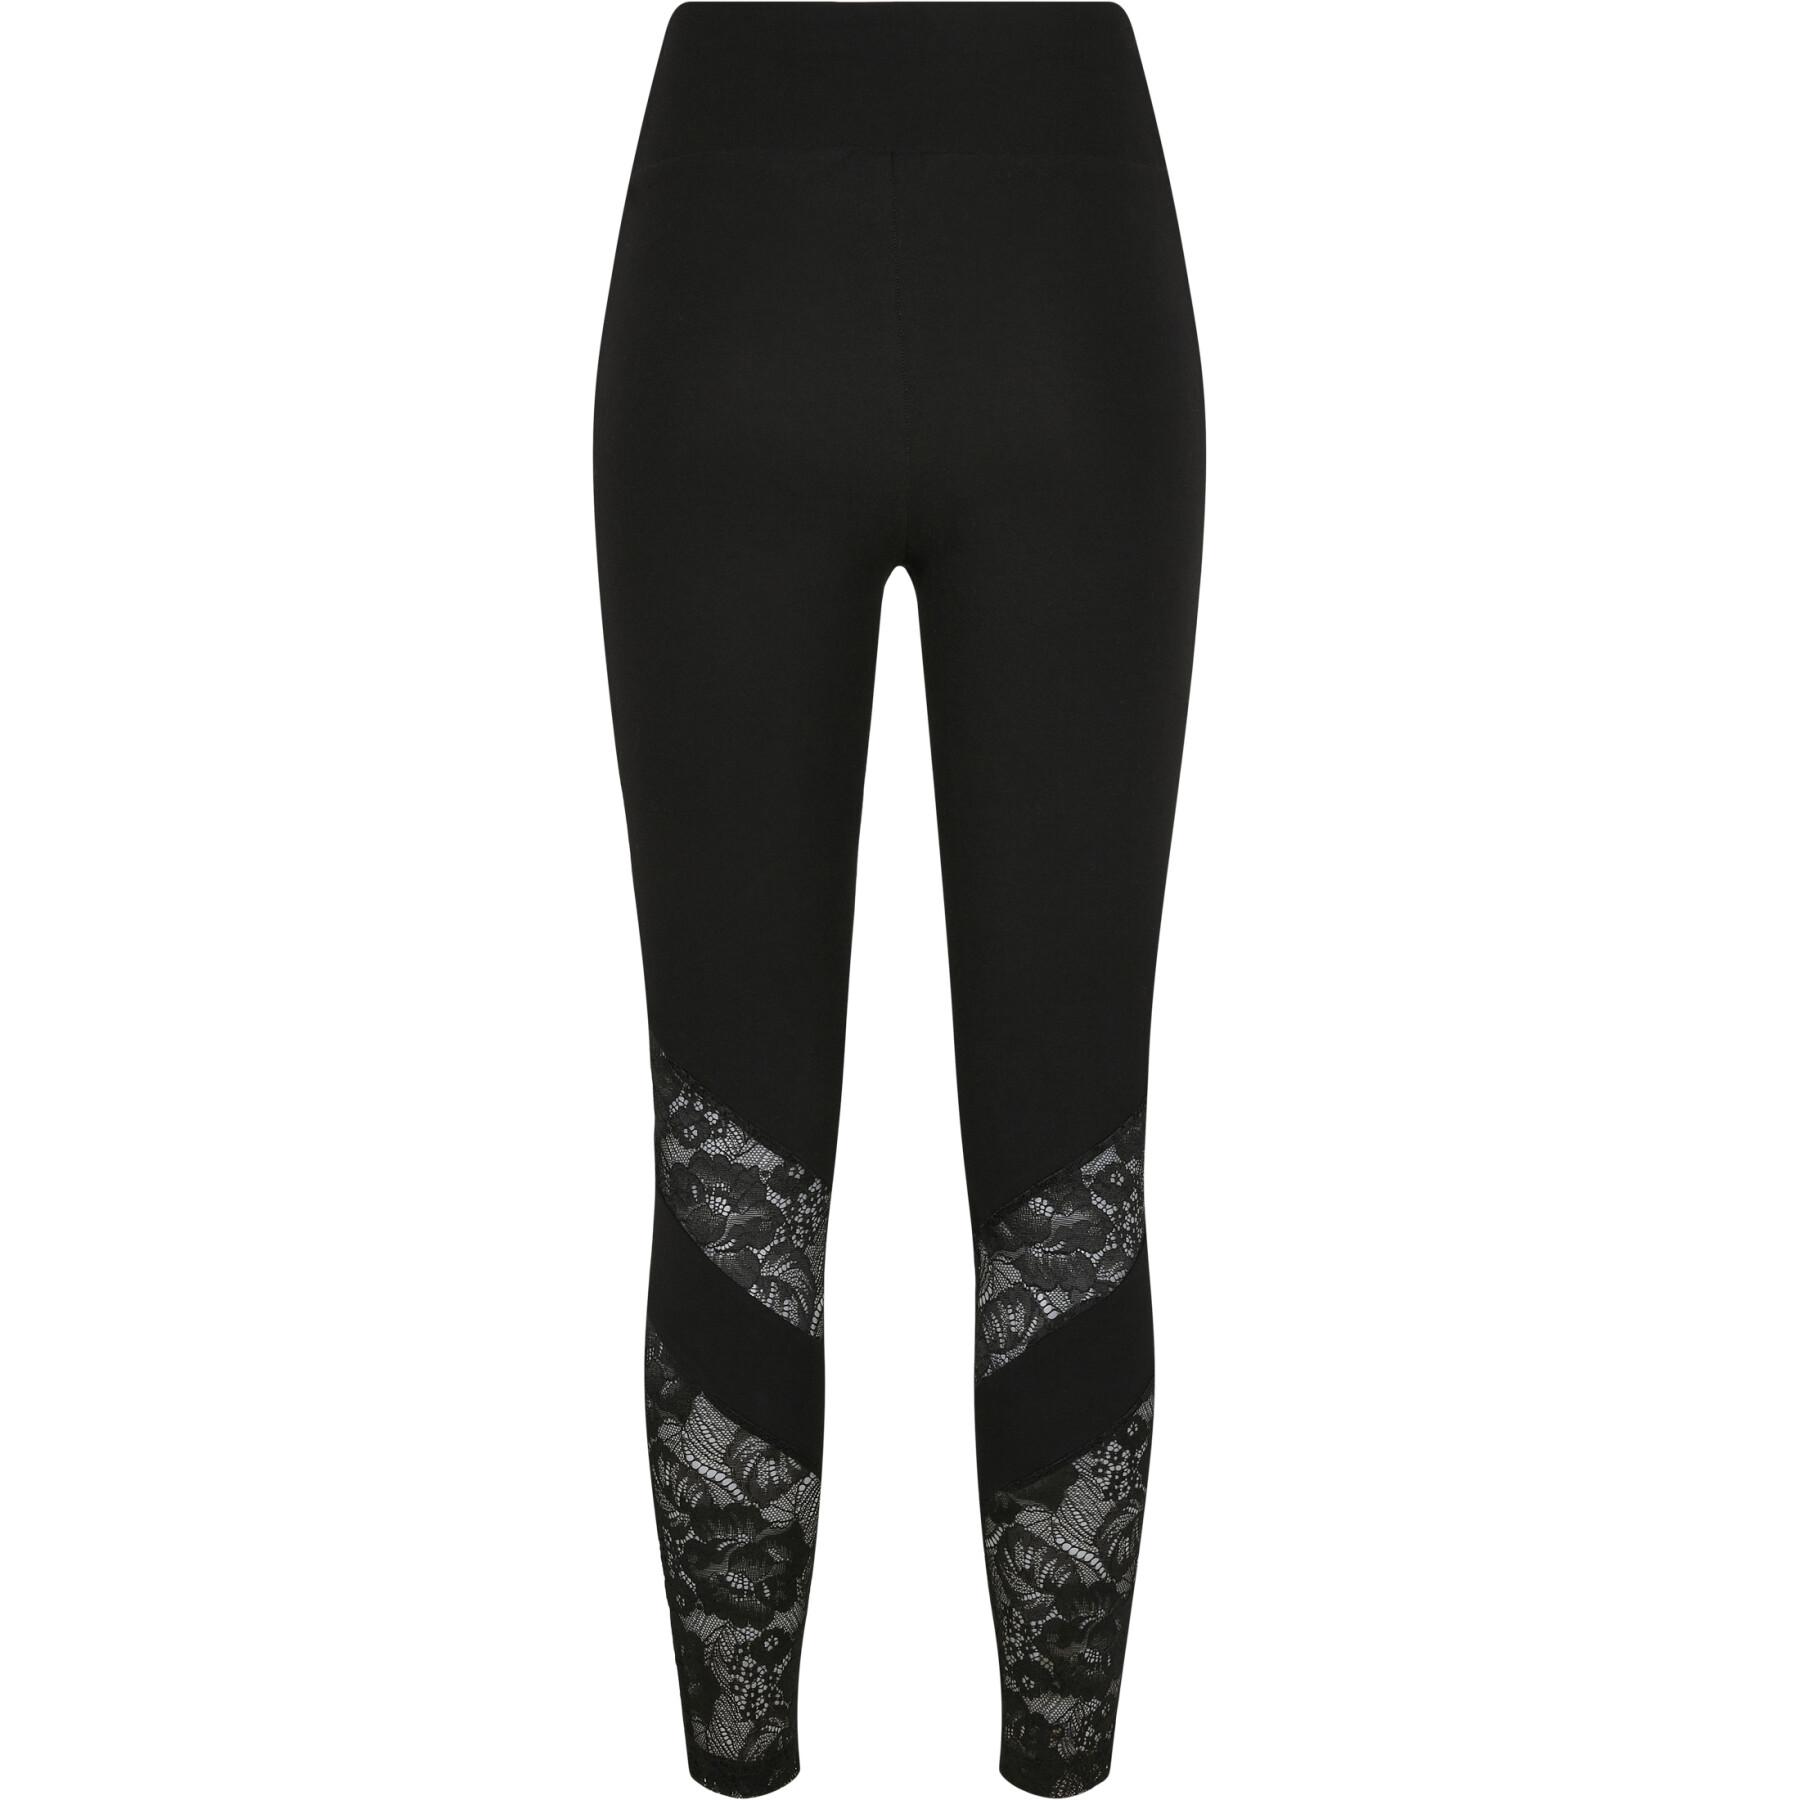 Women's high-waisted leggings Urban Classics lace inset (GT)